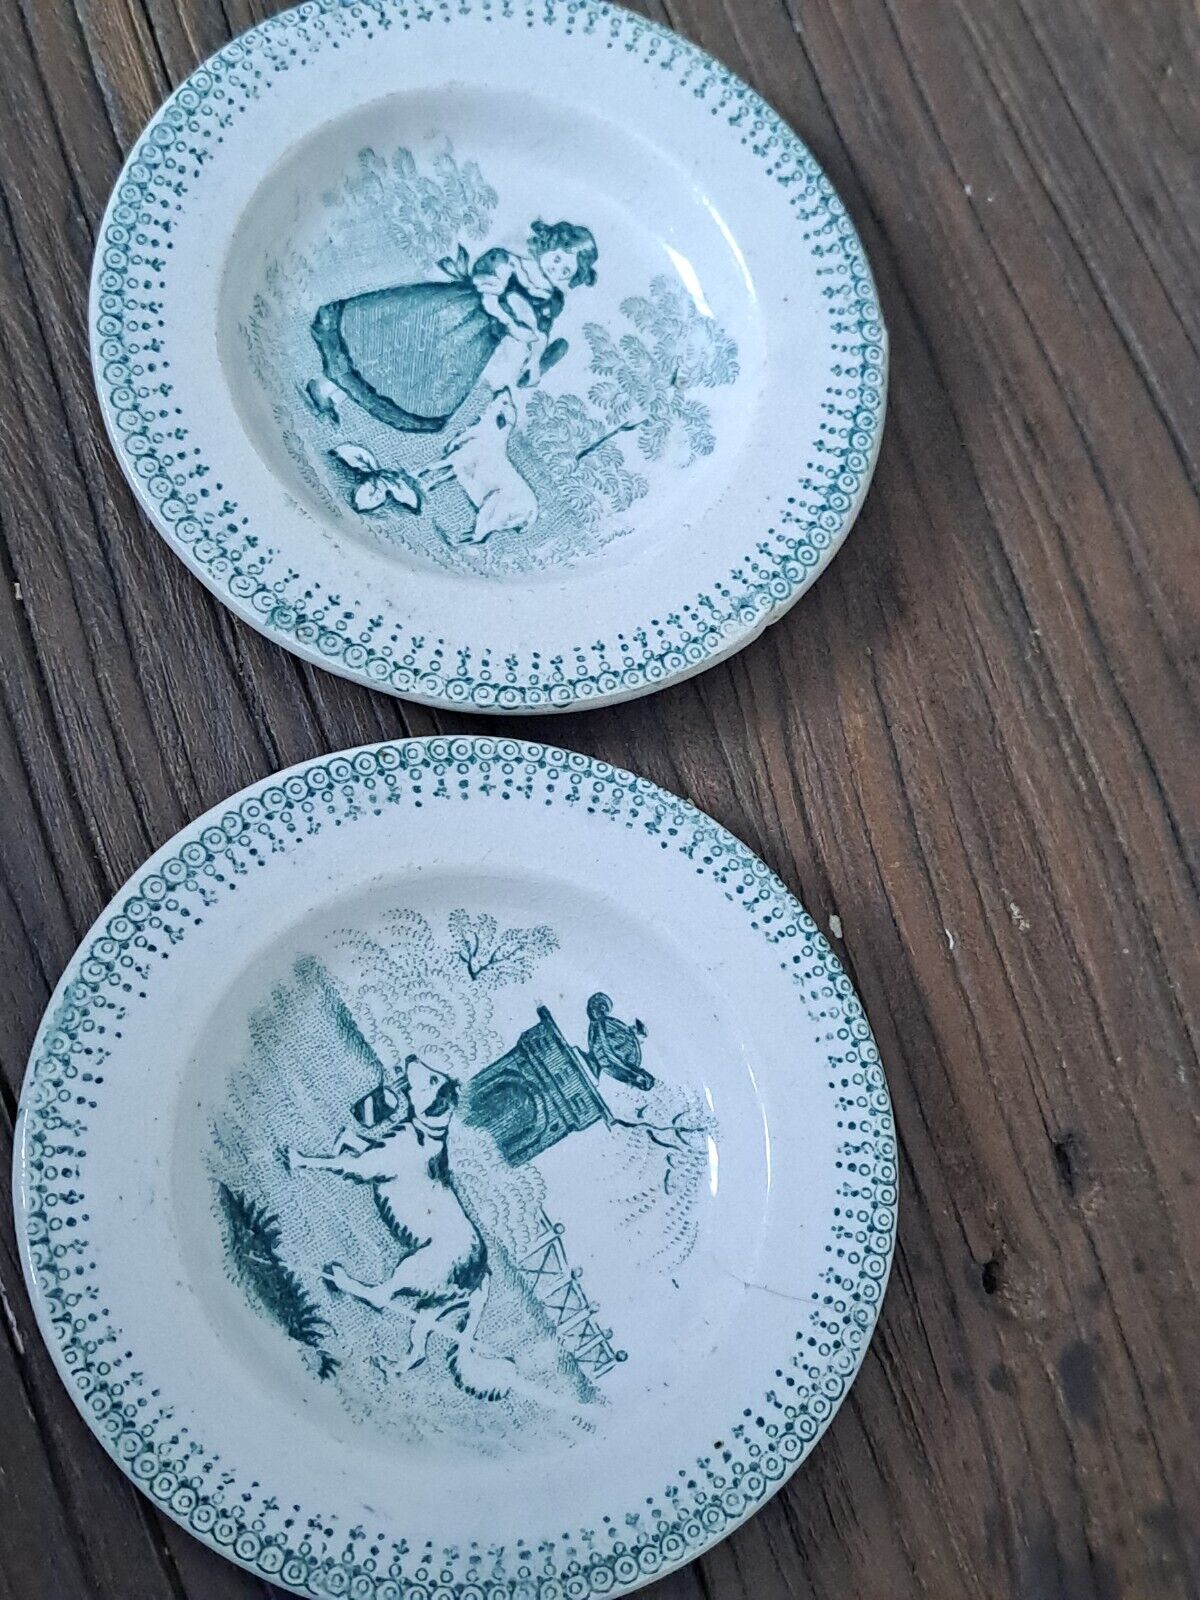 Antique Valuations: Two Antique  Pearlware Transfer Miniature  Plates.